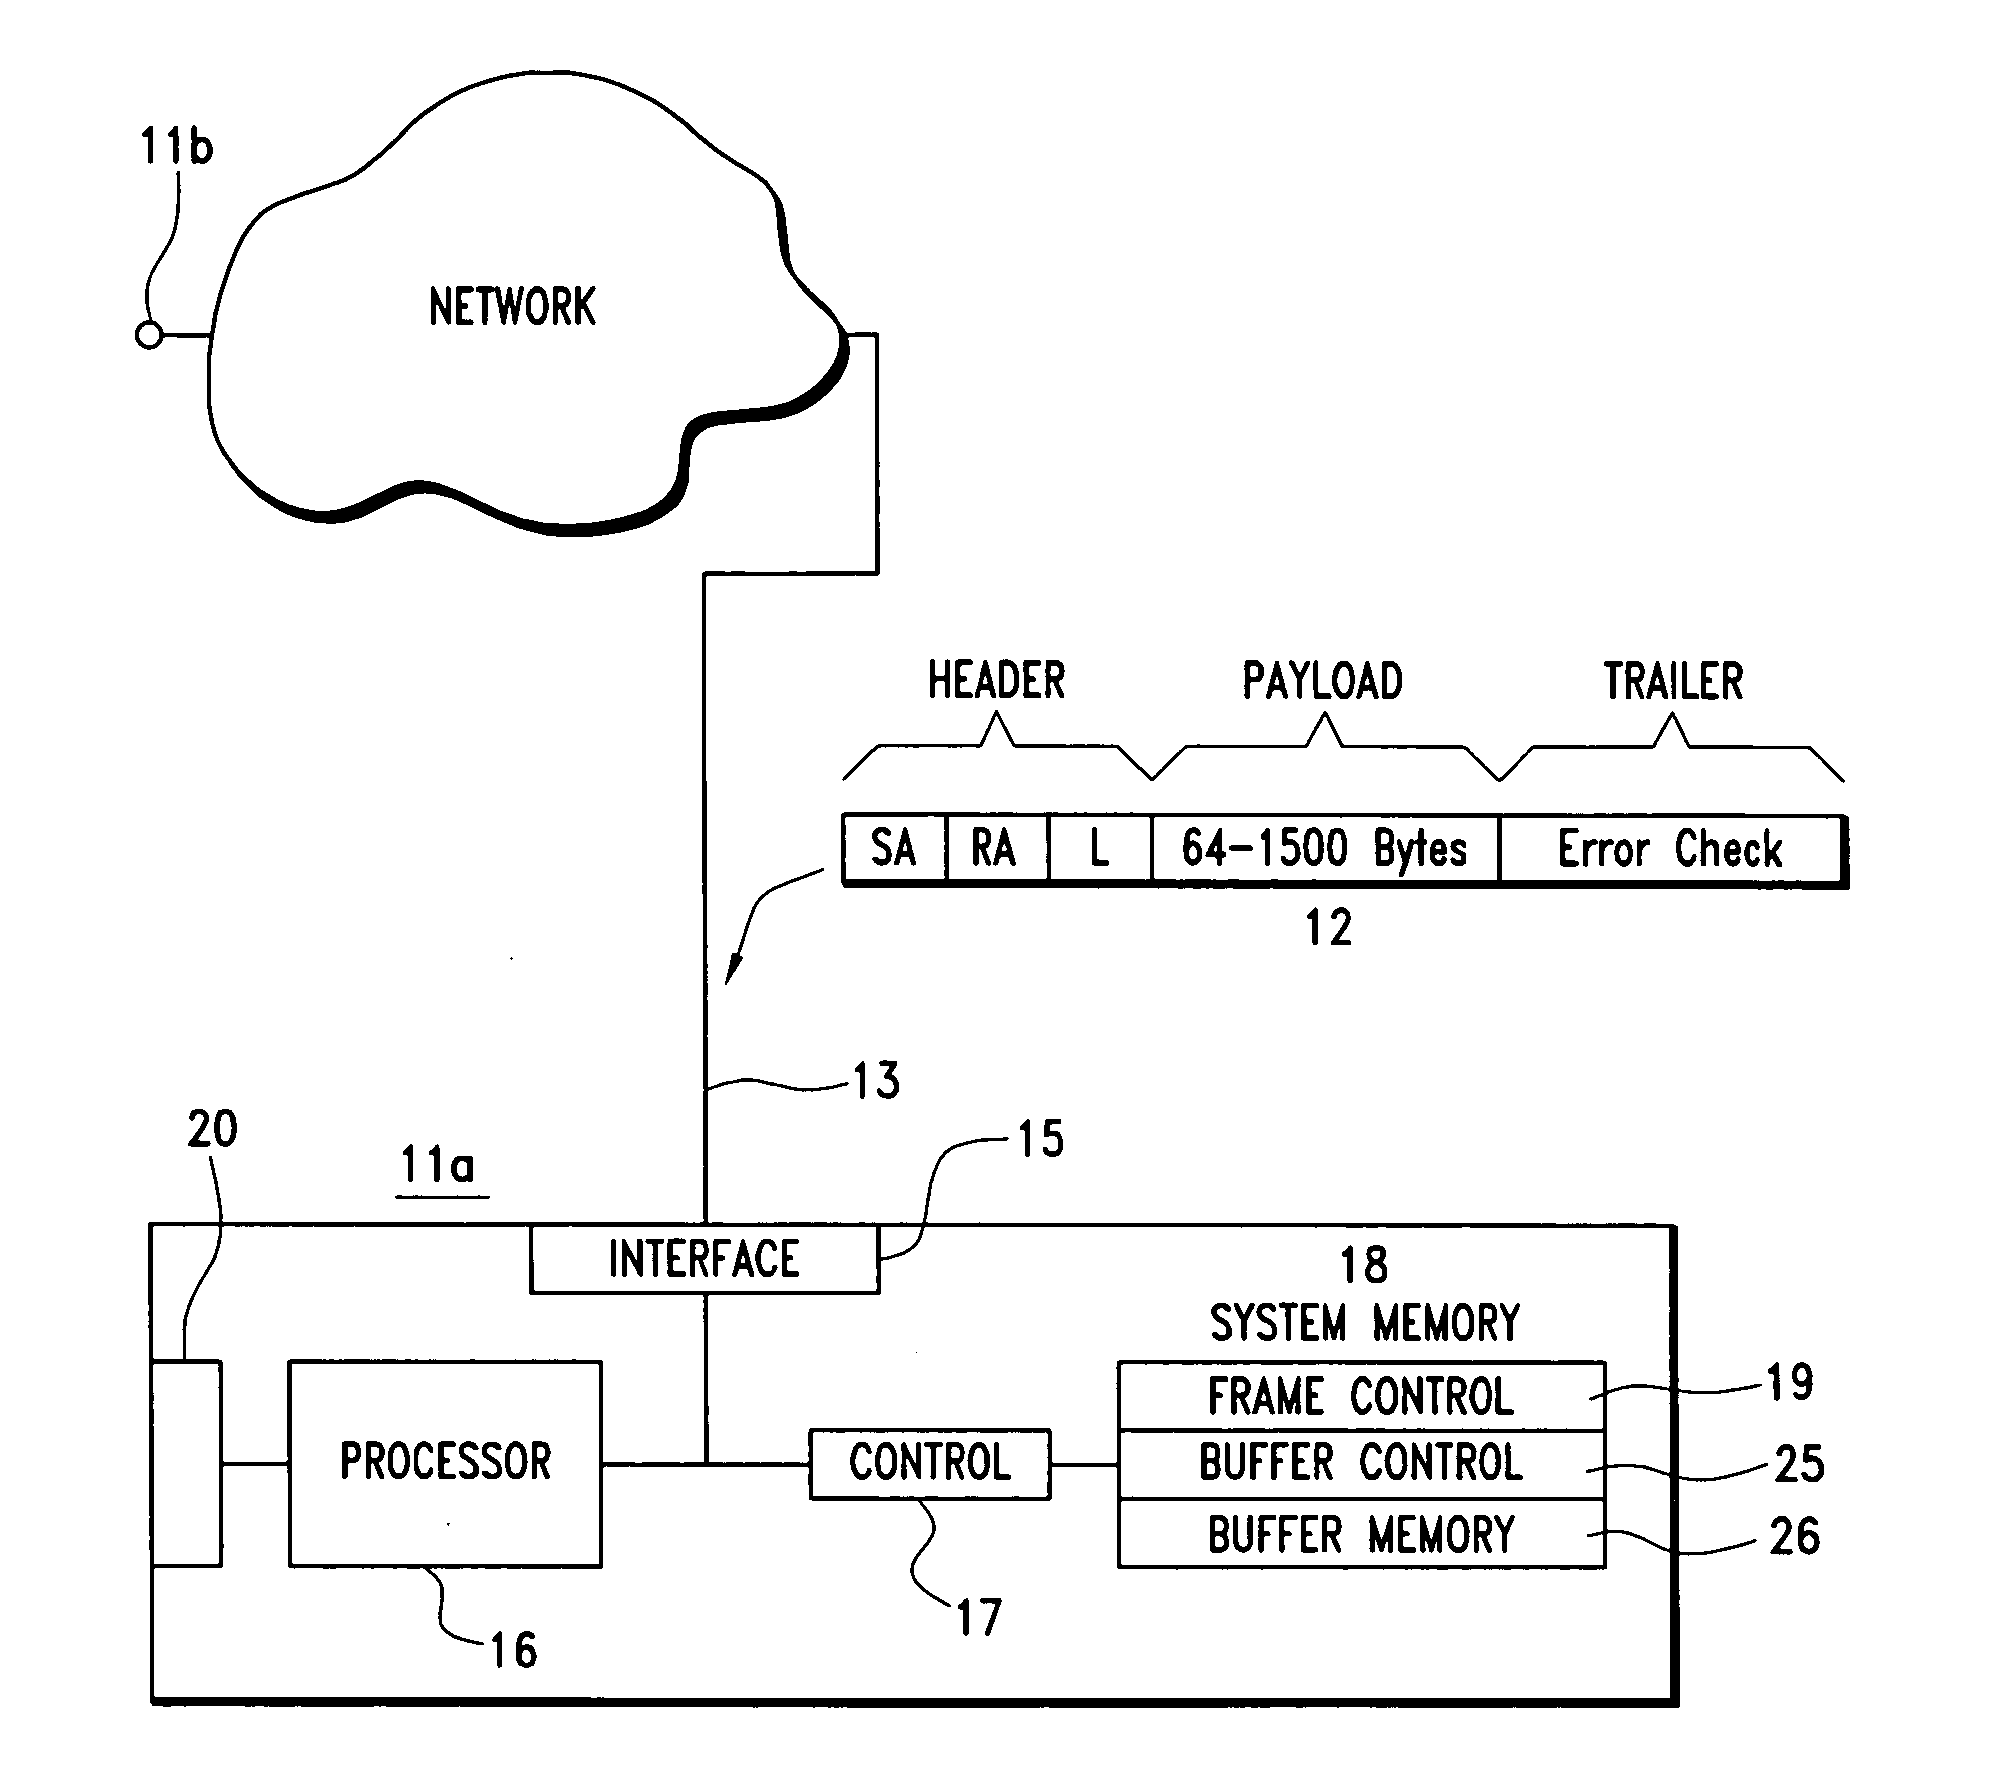 Apparatus and method for efficiently modifying network data frames